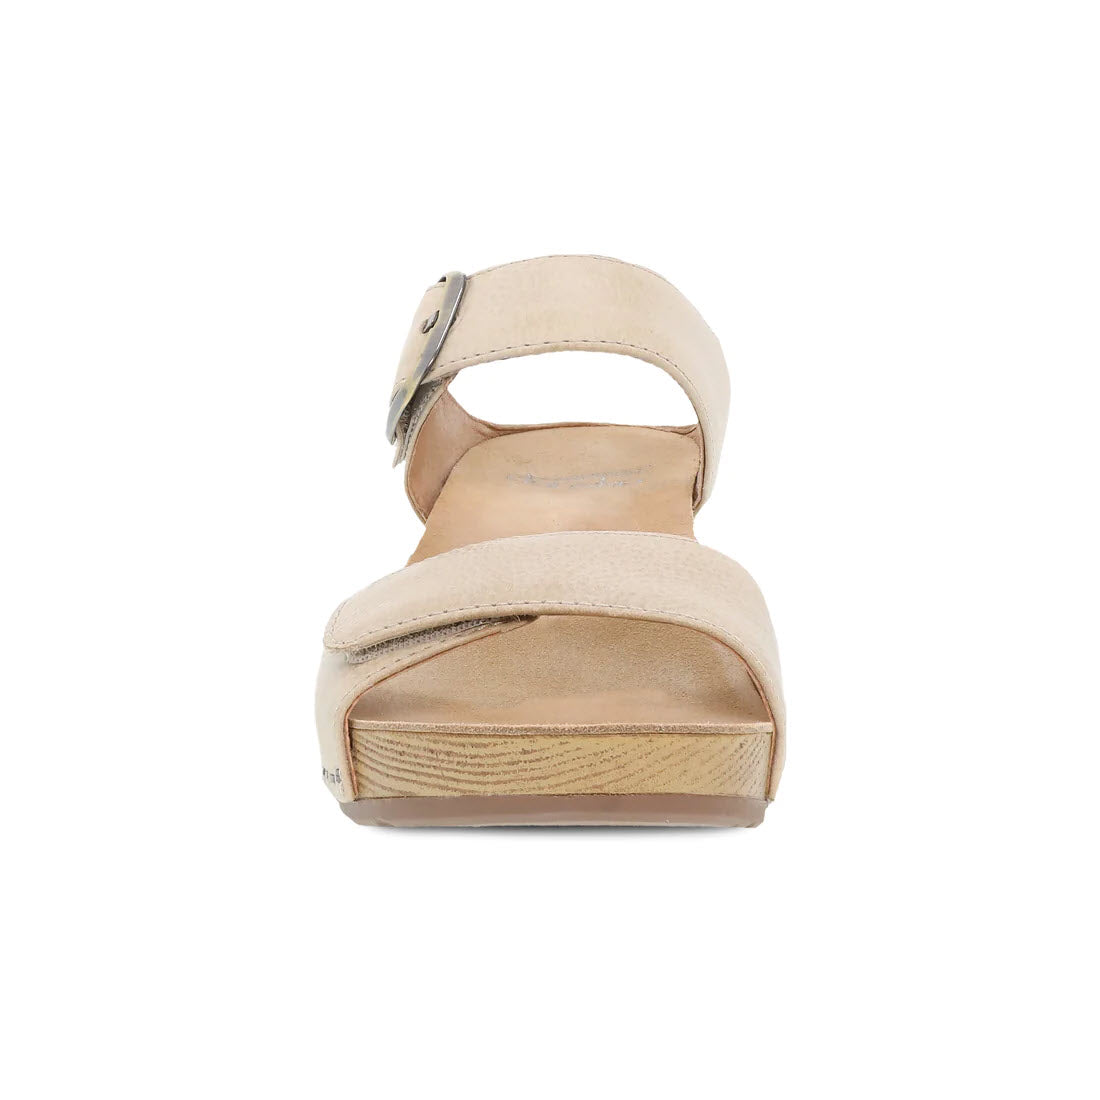 A Dansko Tanya Linen women&#39;s platform sandal with a thick strap and buckle closure, viewed from the front.